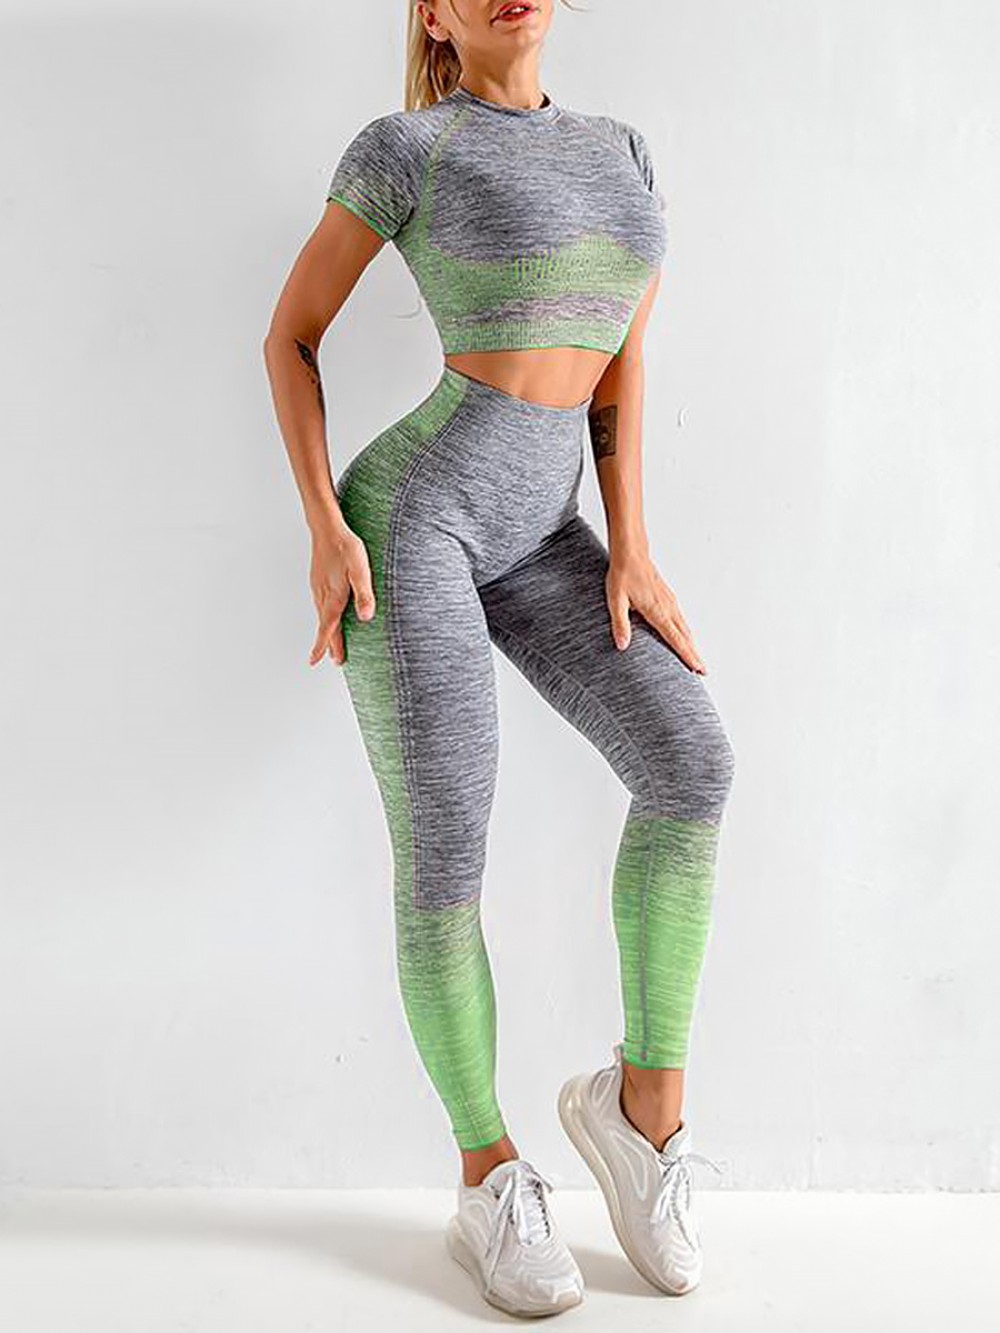 Exquisite Green Crop Top Seamless High Waist Pants Athletic Apparel